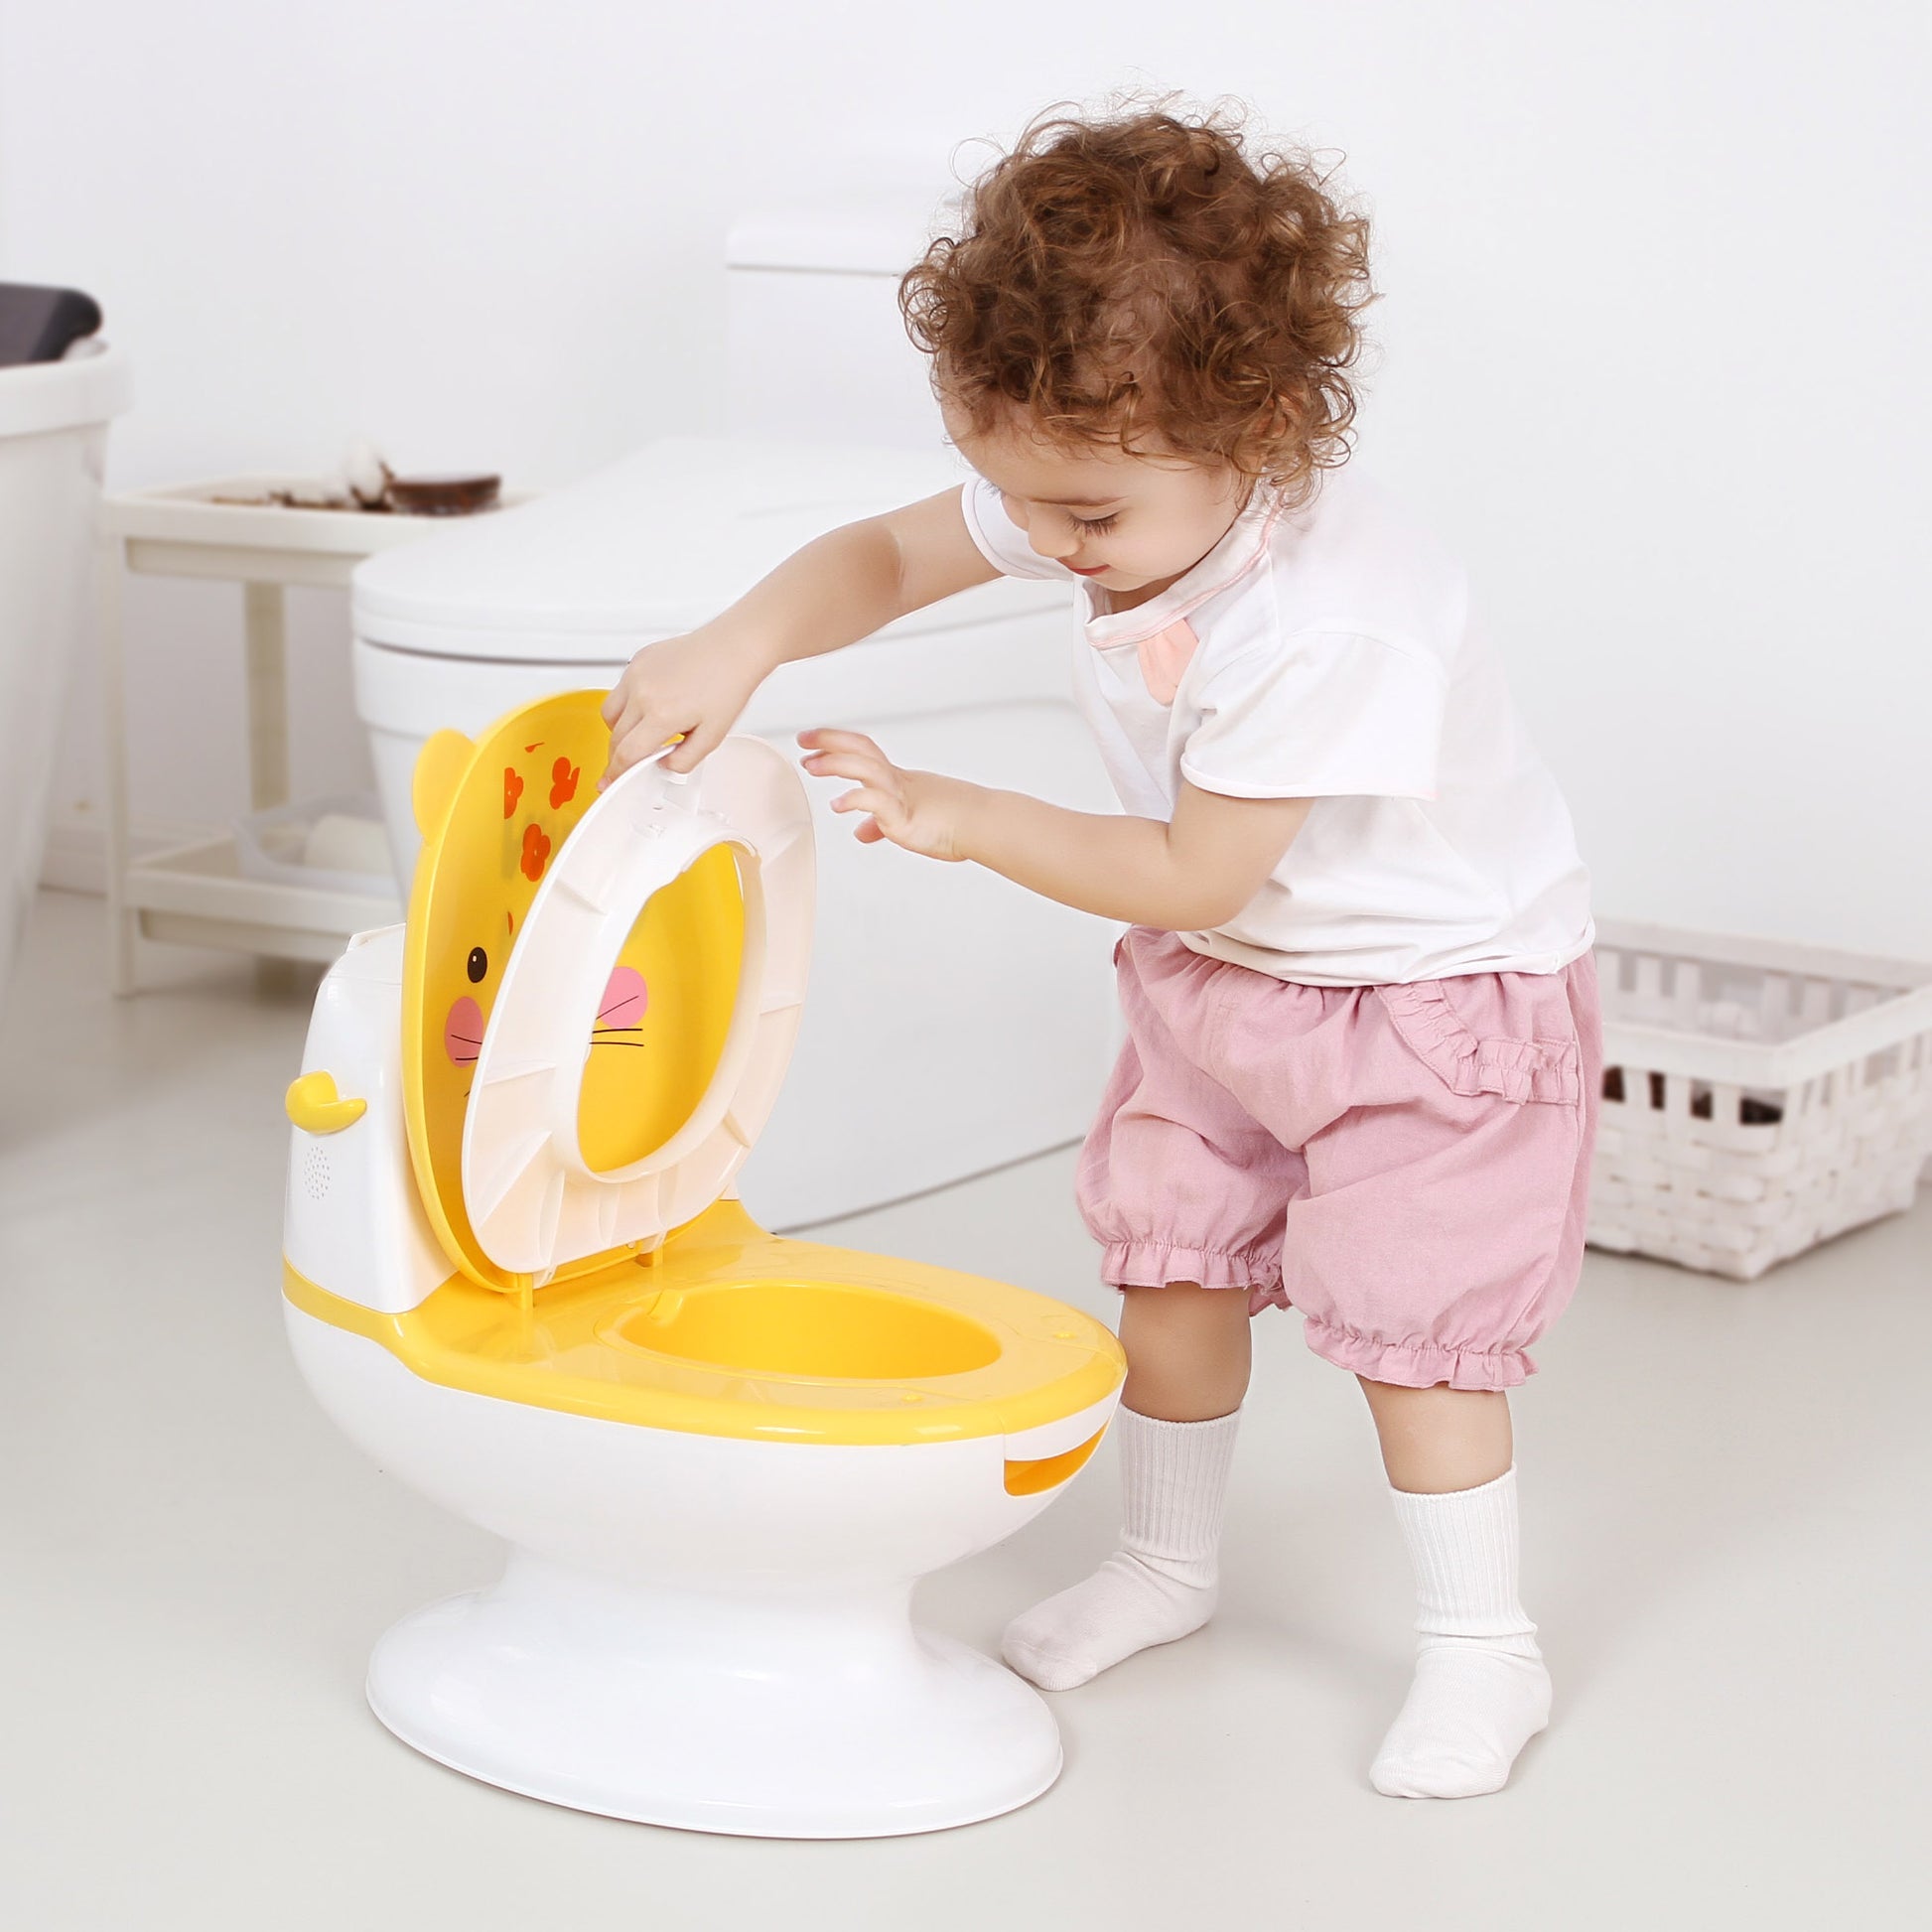 baby opening lid of yellow toilet seat 